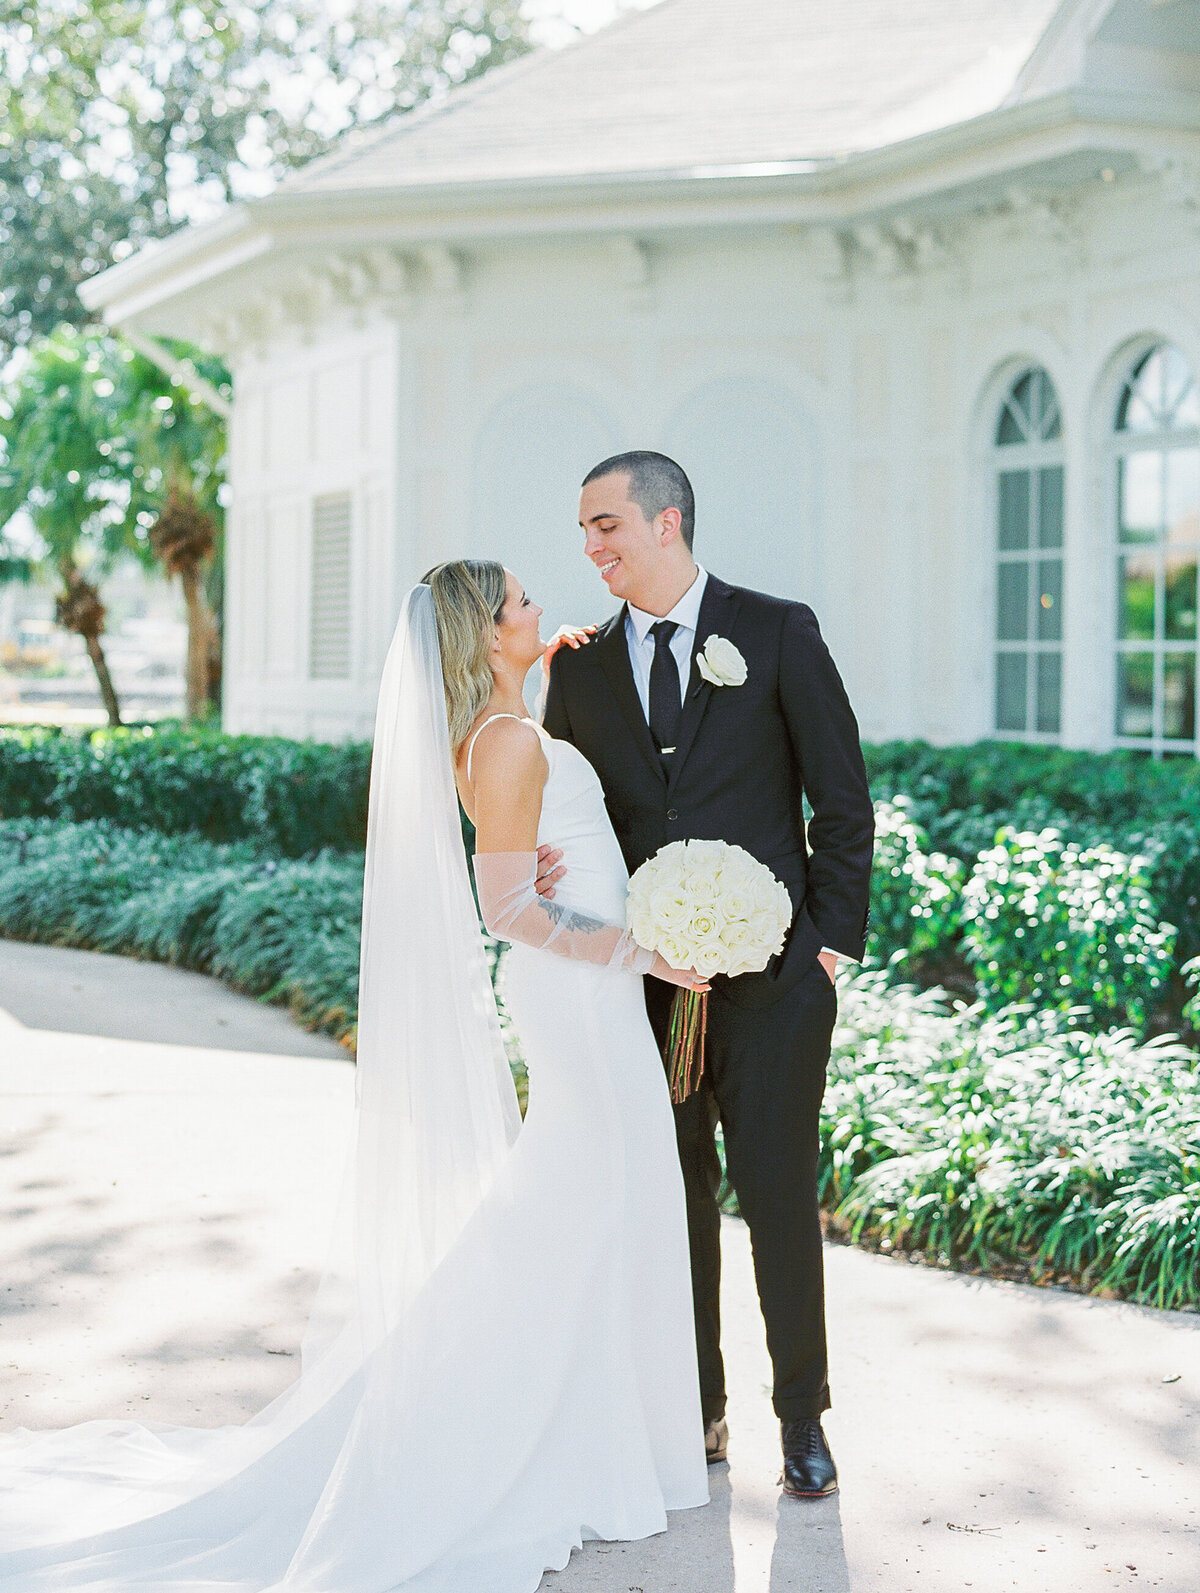 KatieTraufferPhotography- Emily and Miguel Wedding- 556